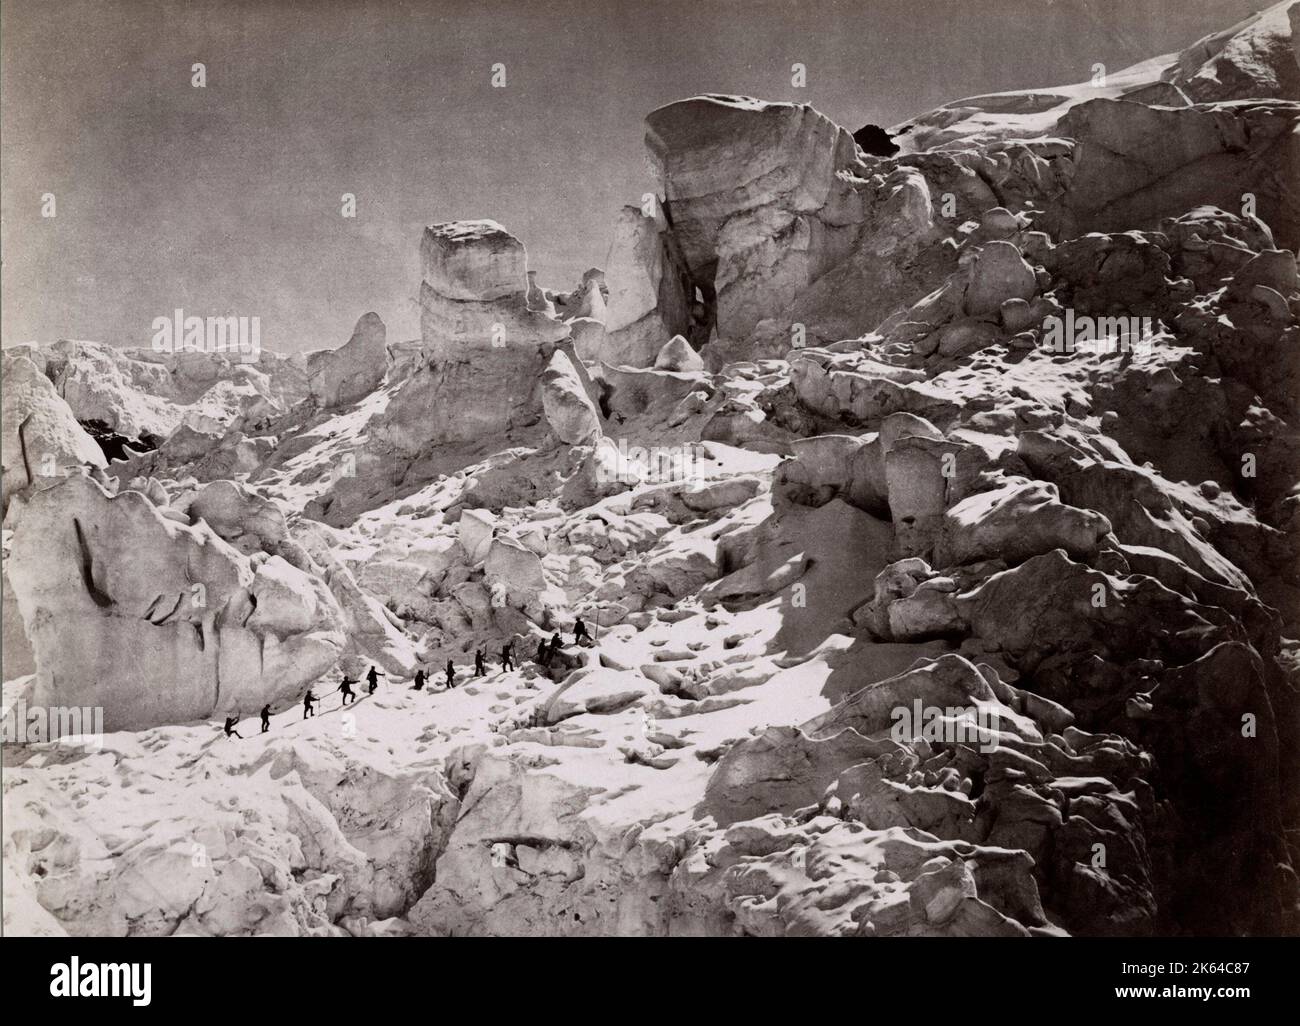 Late 19th century photograph - Climbing the the Alps, climbers roped. Stock Photo